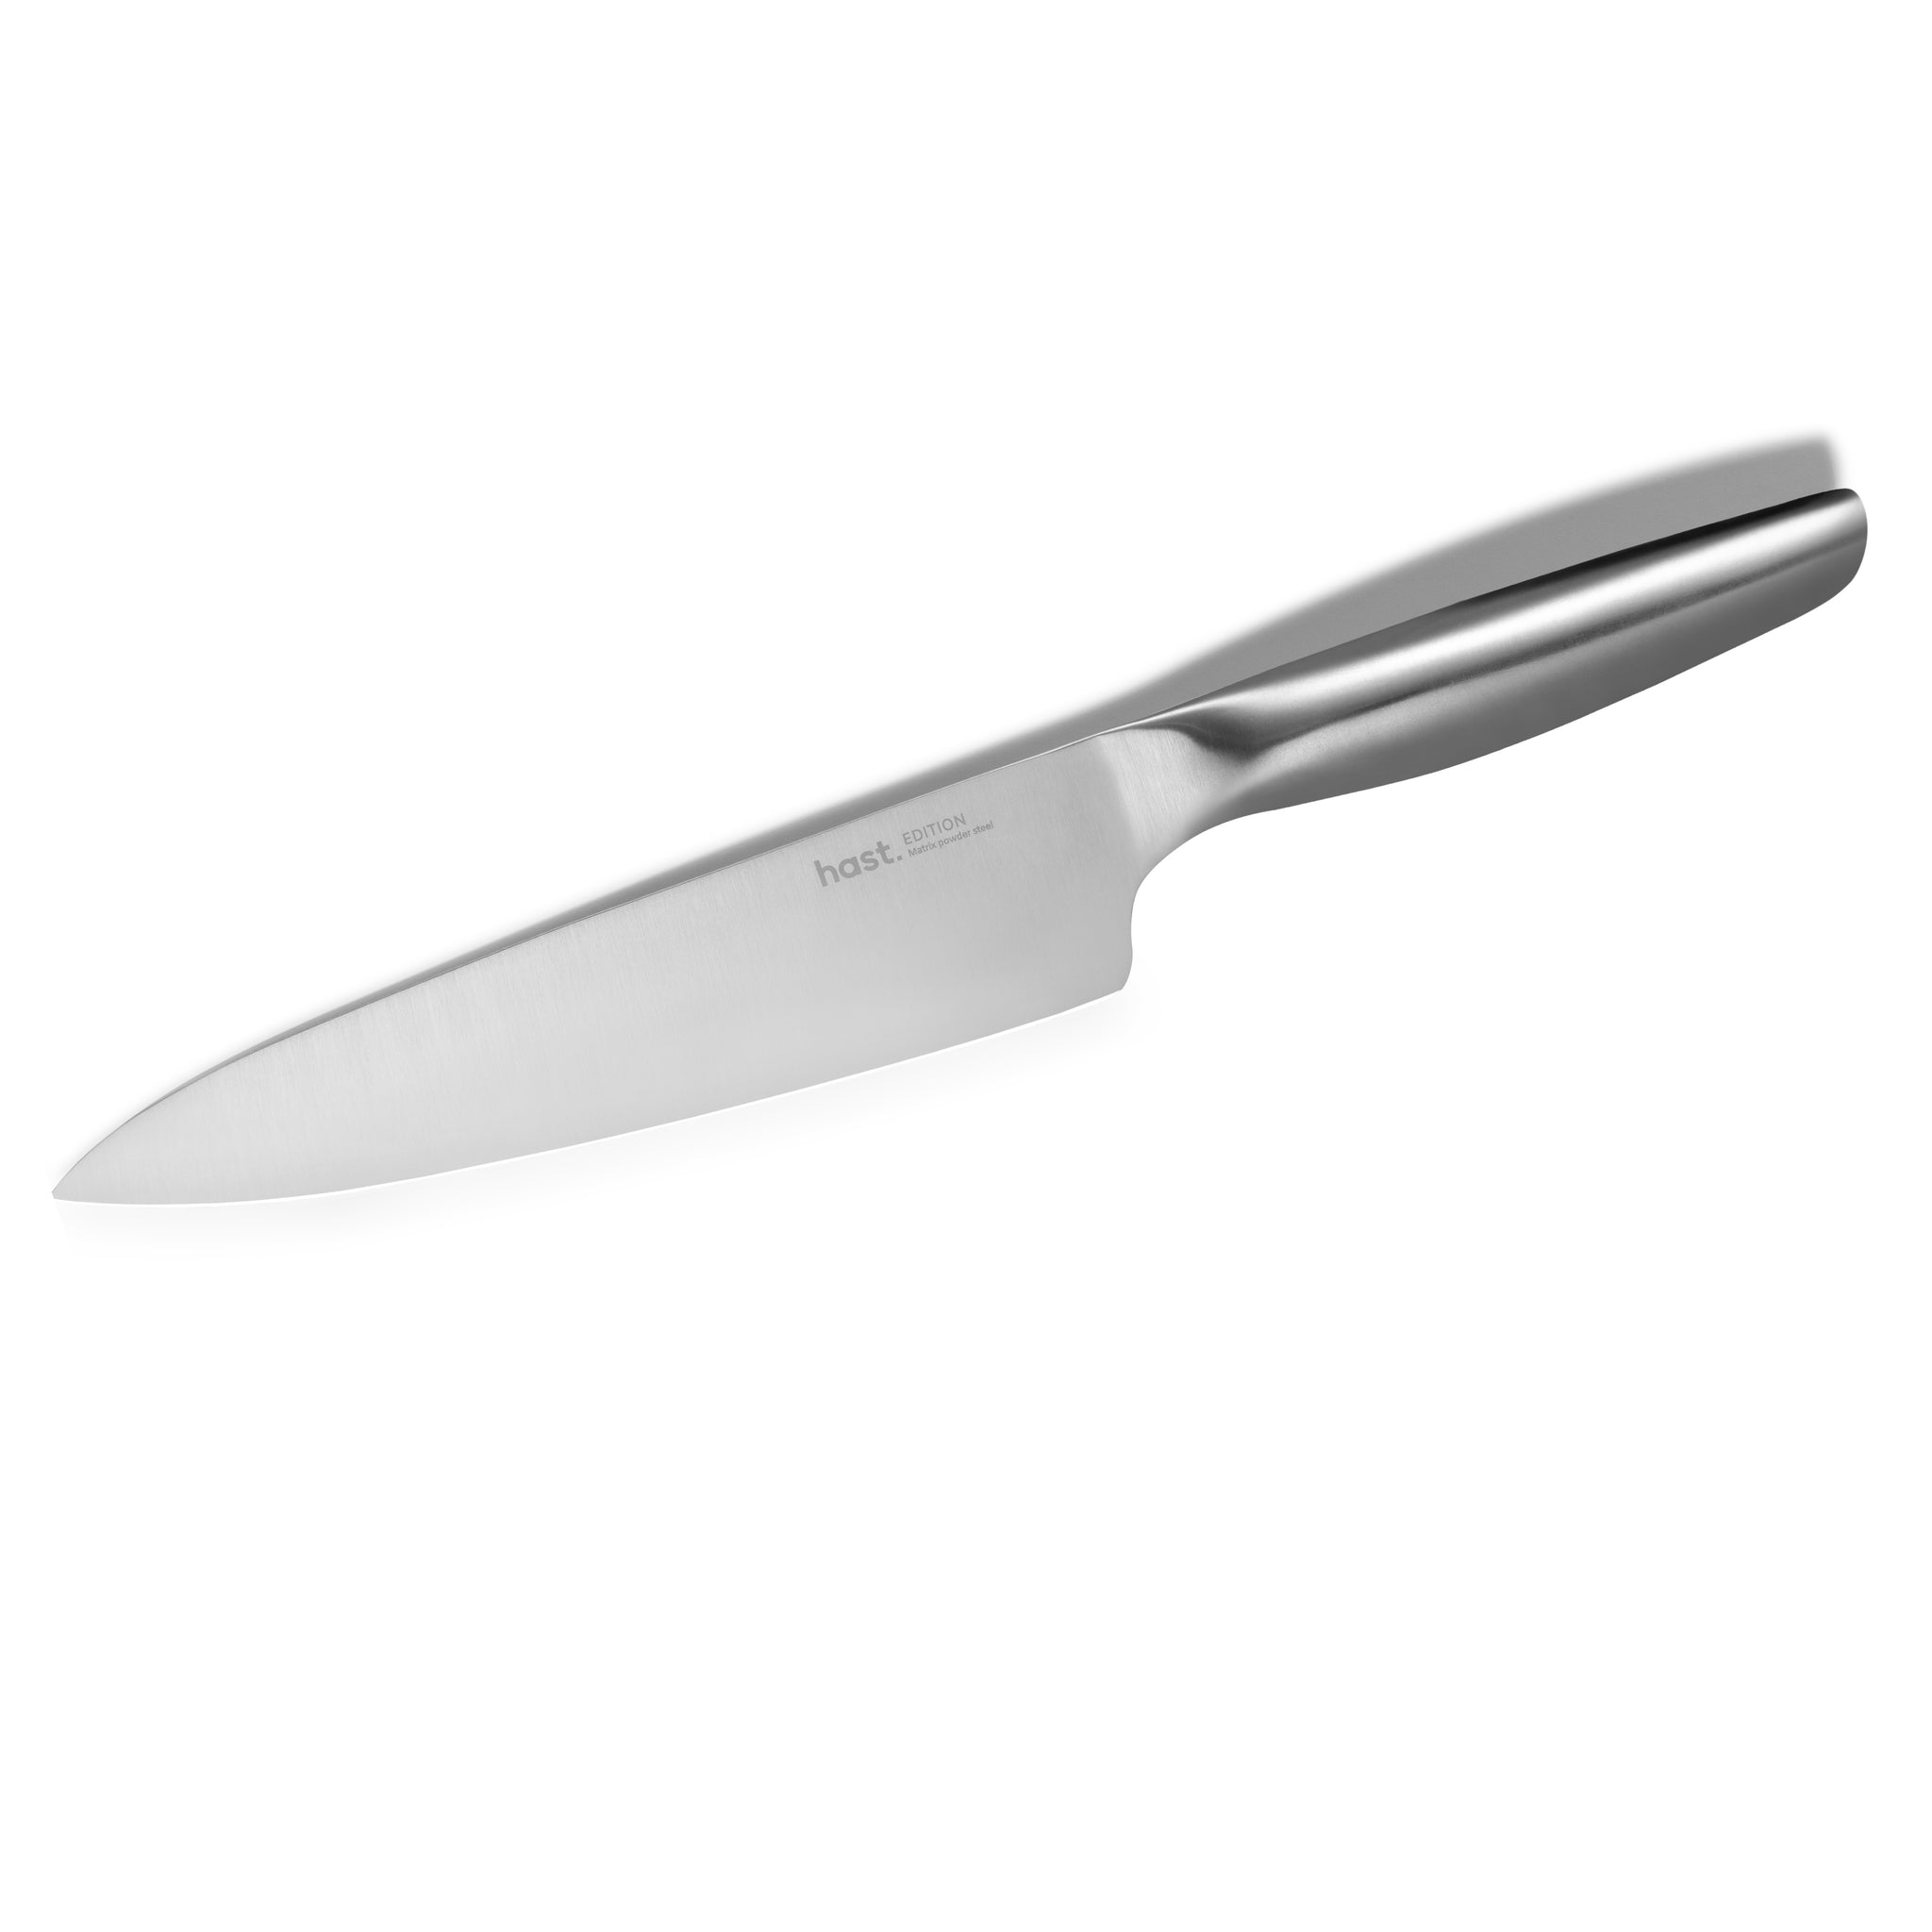  Good Cook Touch 8-Inch Carbon Steel Chef's Knife